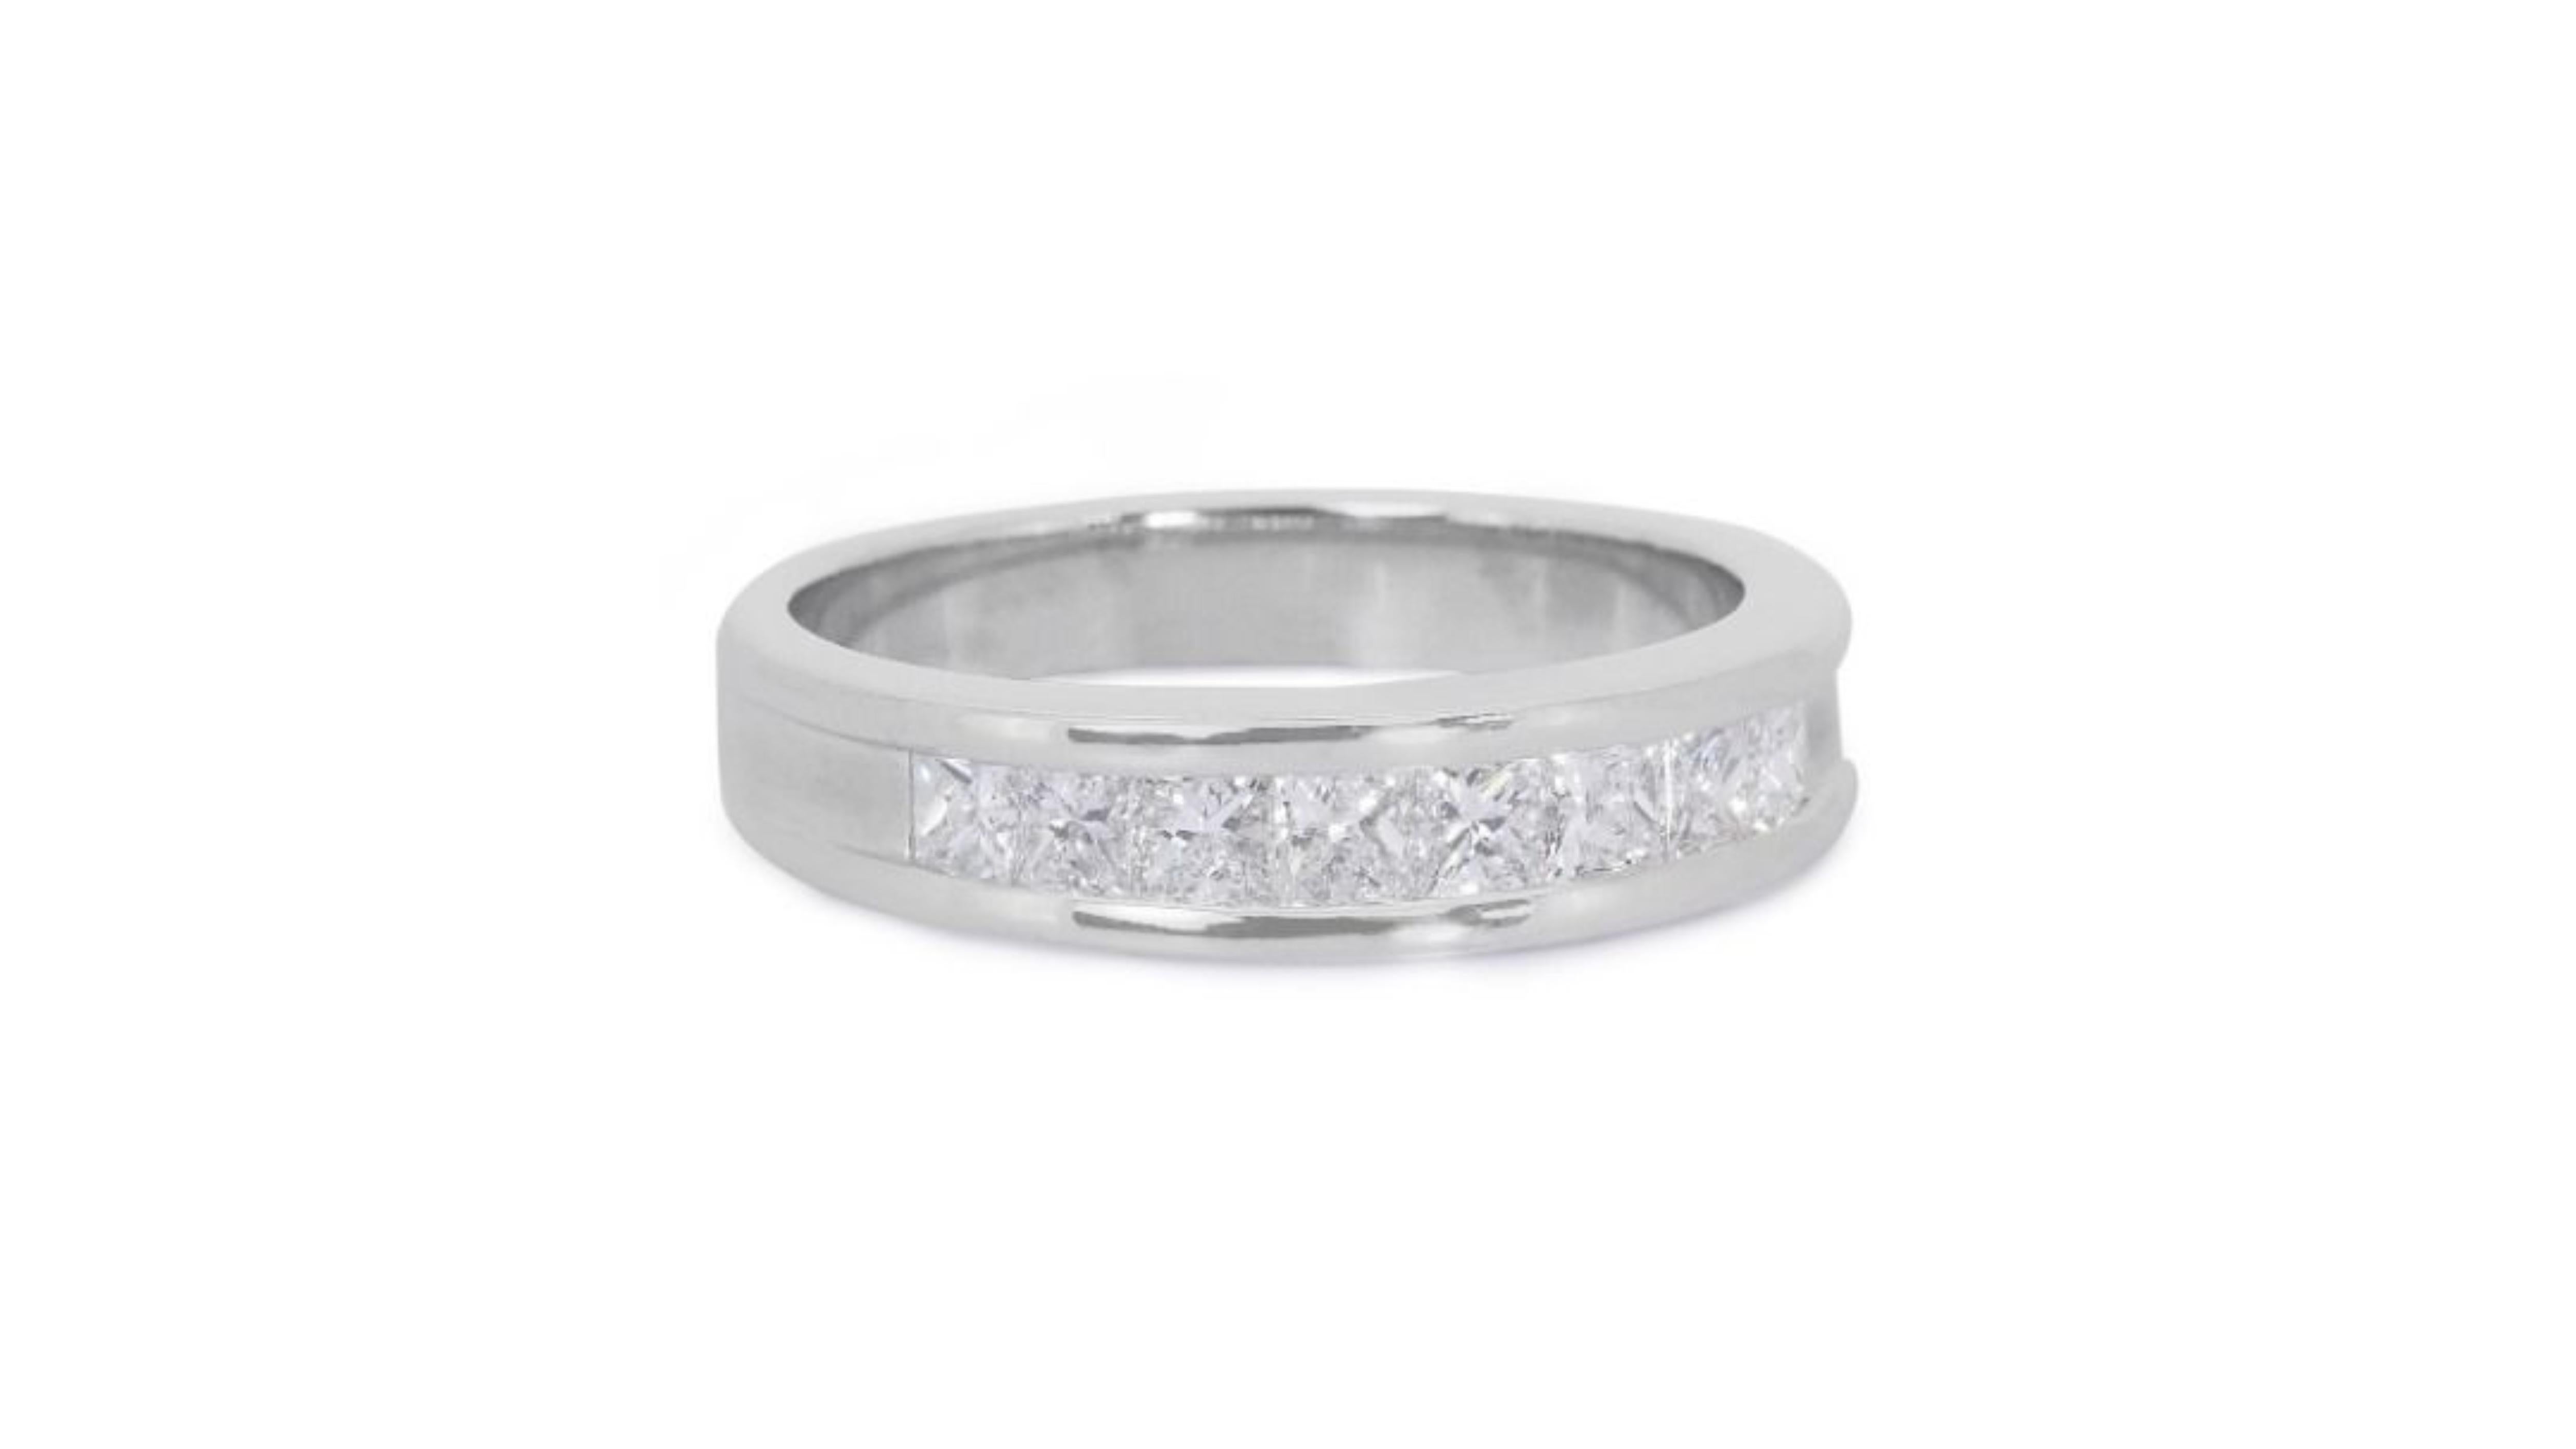 Marvelous 18k White Gold Ring with 1.05ct. Princess Diamond Pave For Sale 1